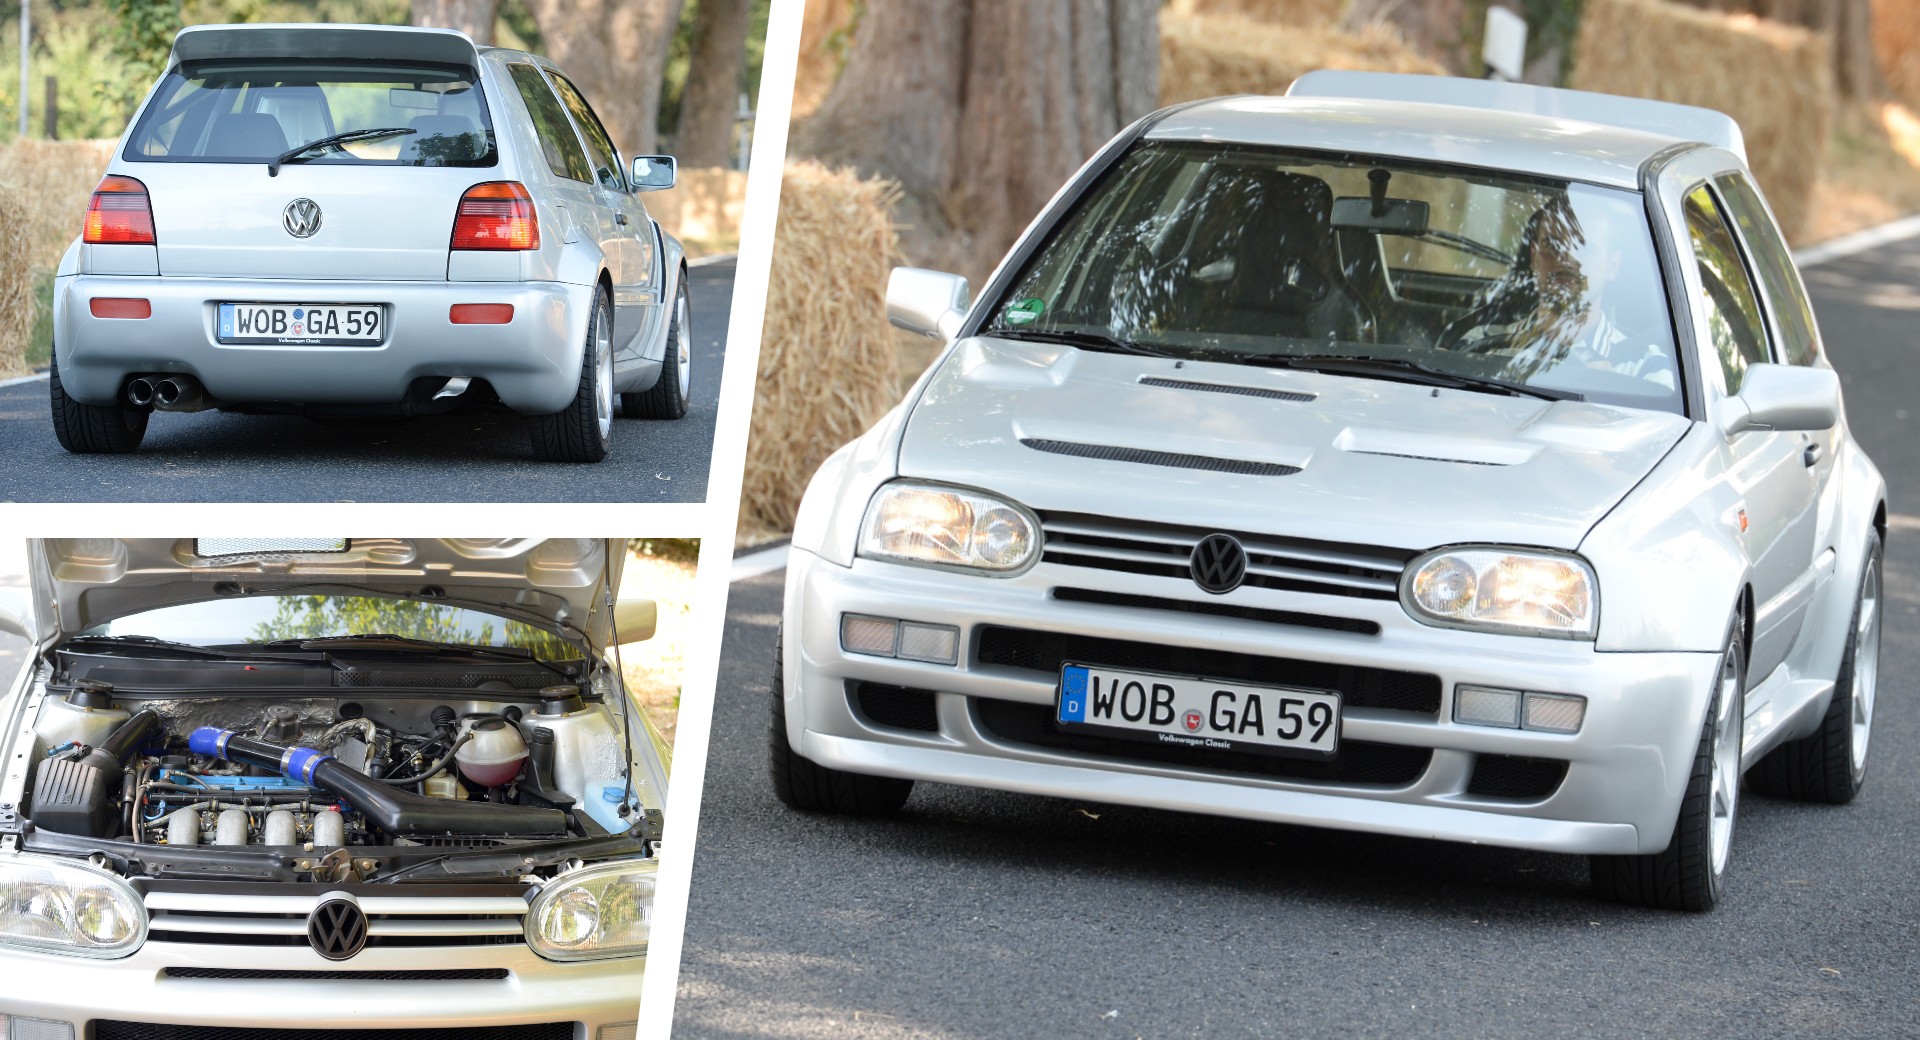 1993 VW Golf “Rallye” Prototype Is A WRC Homologation Special That